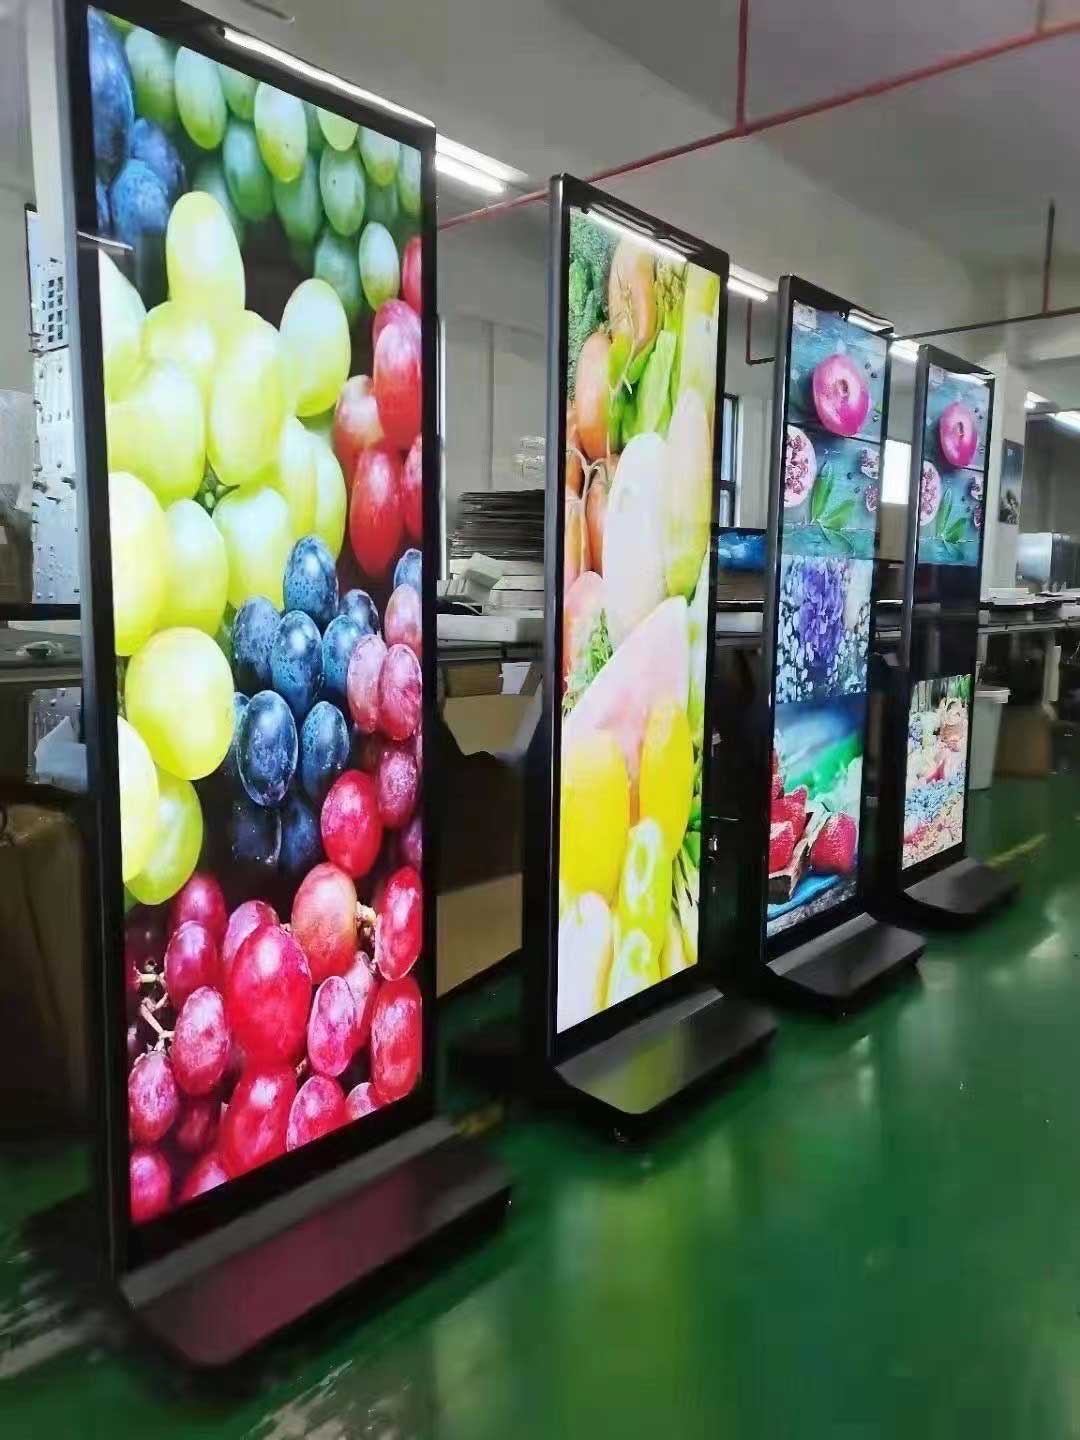 LCD advertising player